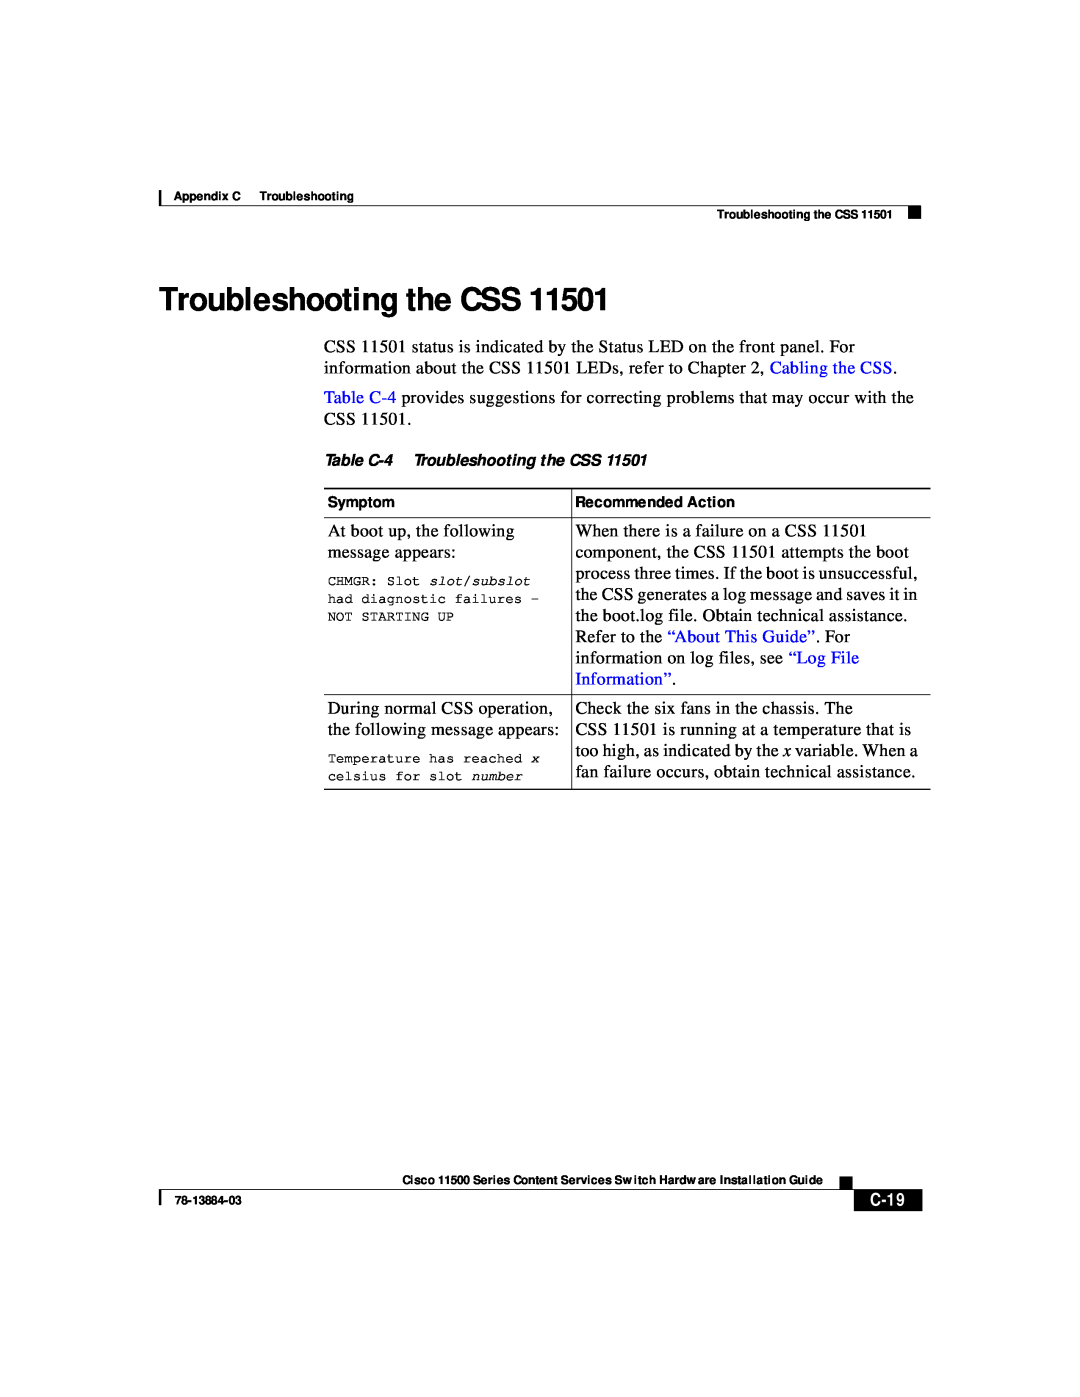 Cisco Systems 11500 Series manual Troubleshooting the CSS, Information”, C-19 